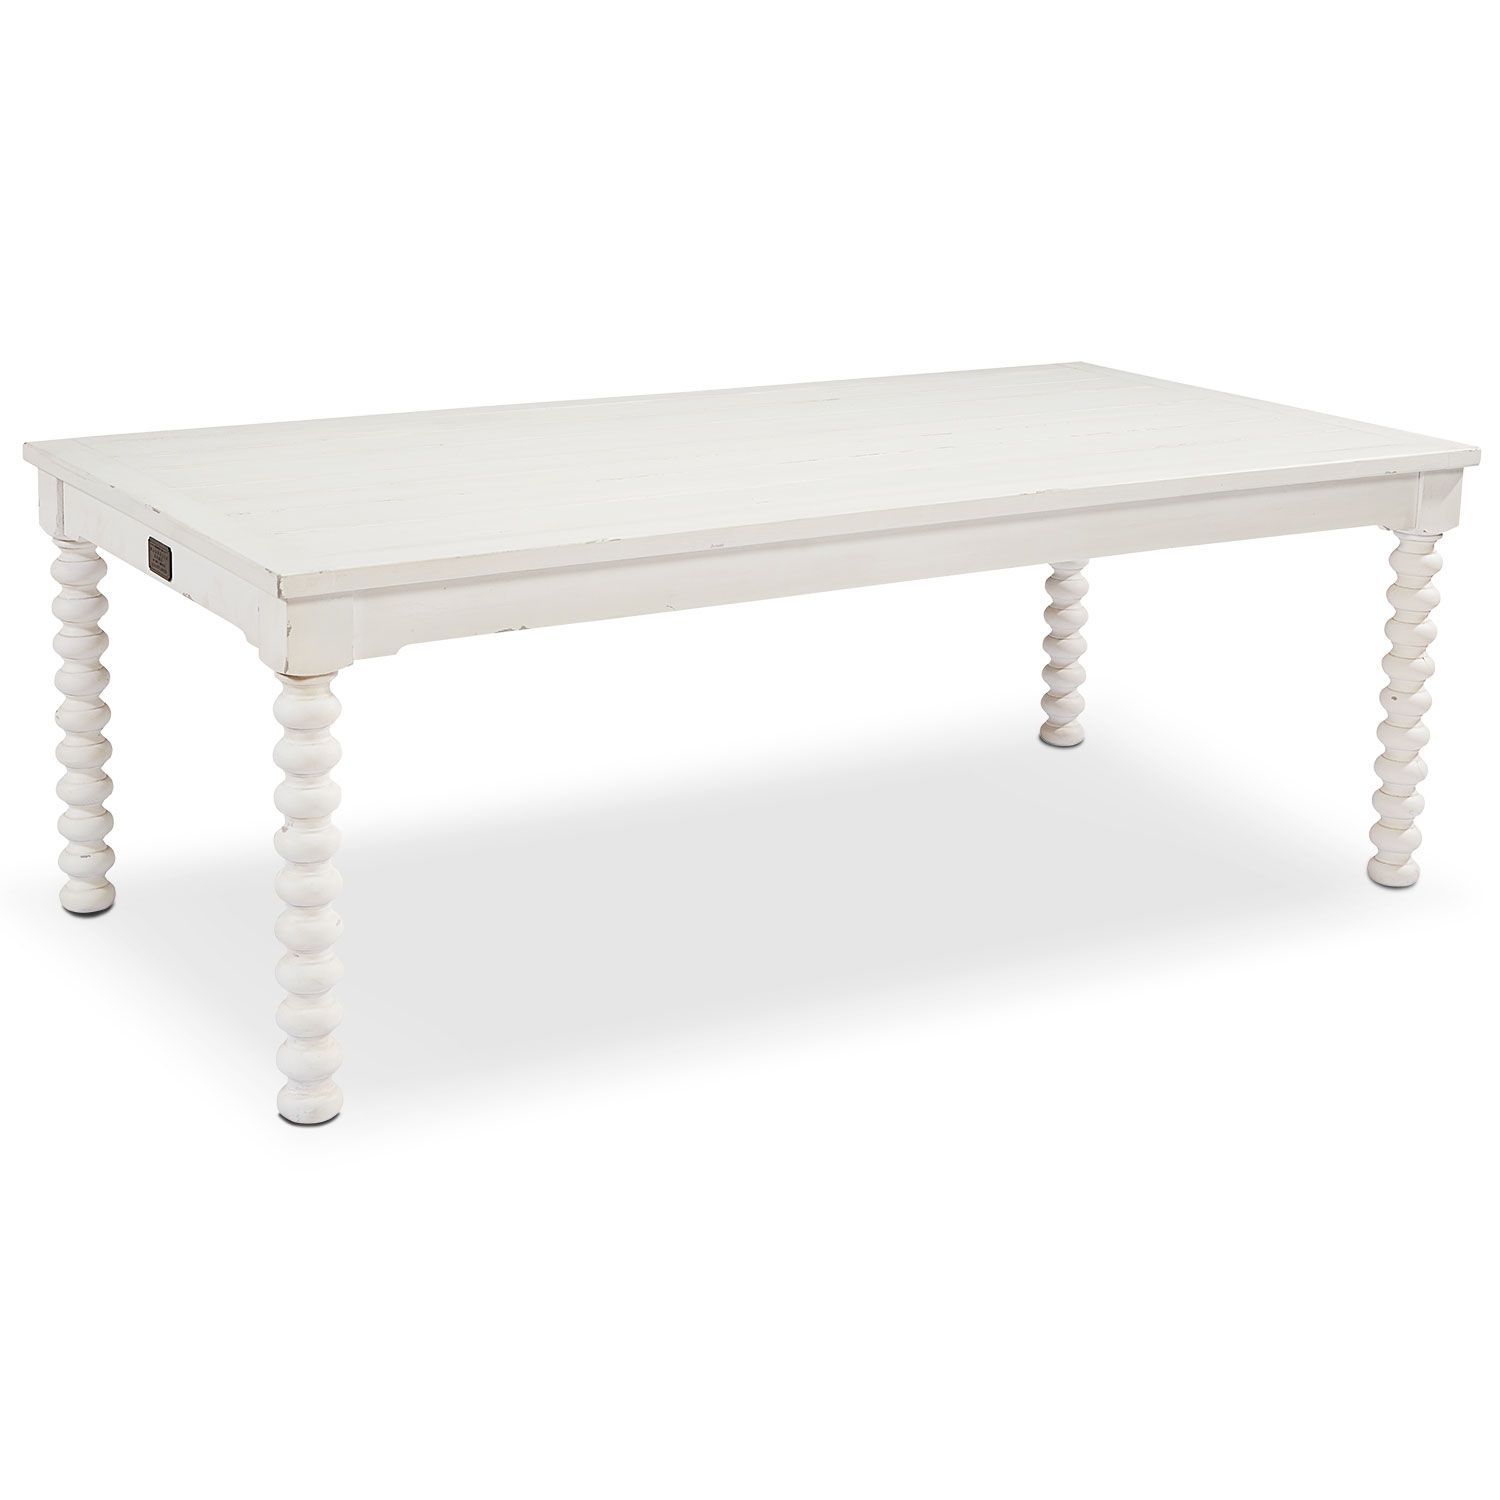 Magnolia Home Kempton White Side Chairs Bjg In Famous 6' Spool Leg Dining Table – Whitemagnolia Home (View 15 of 20)